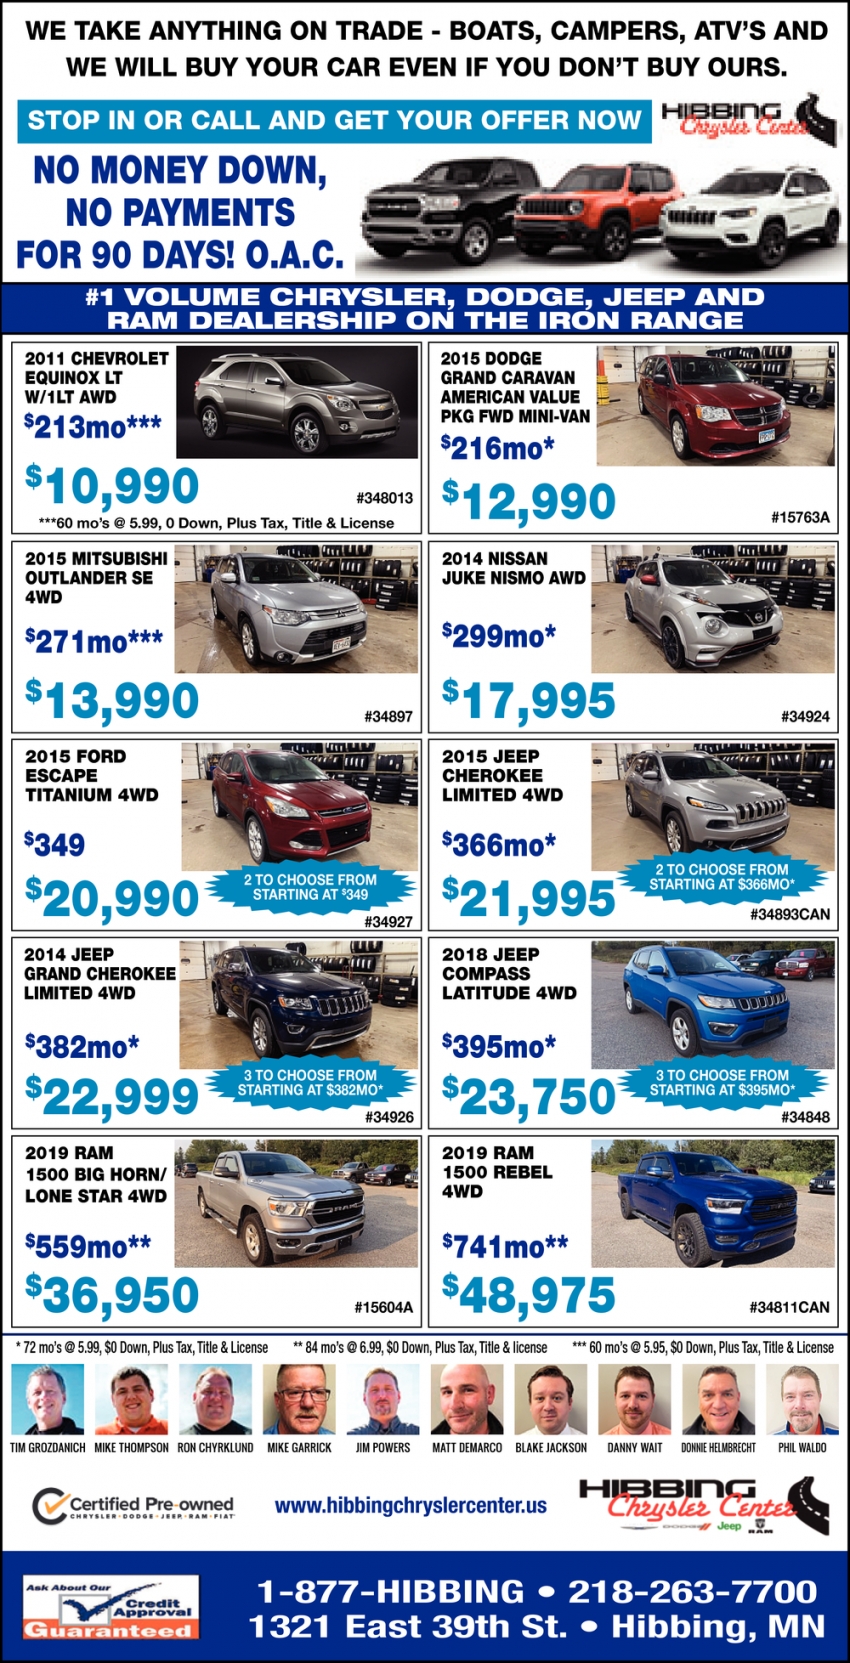 Stop In Or Call And Get Your Offer Now